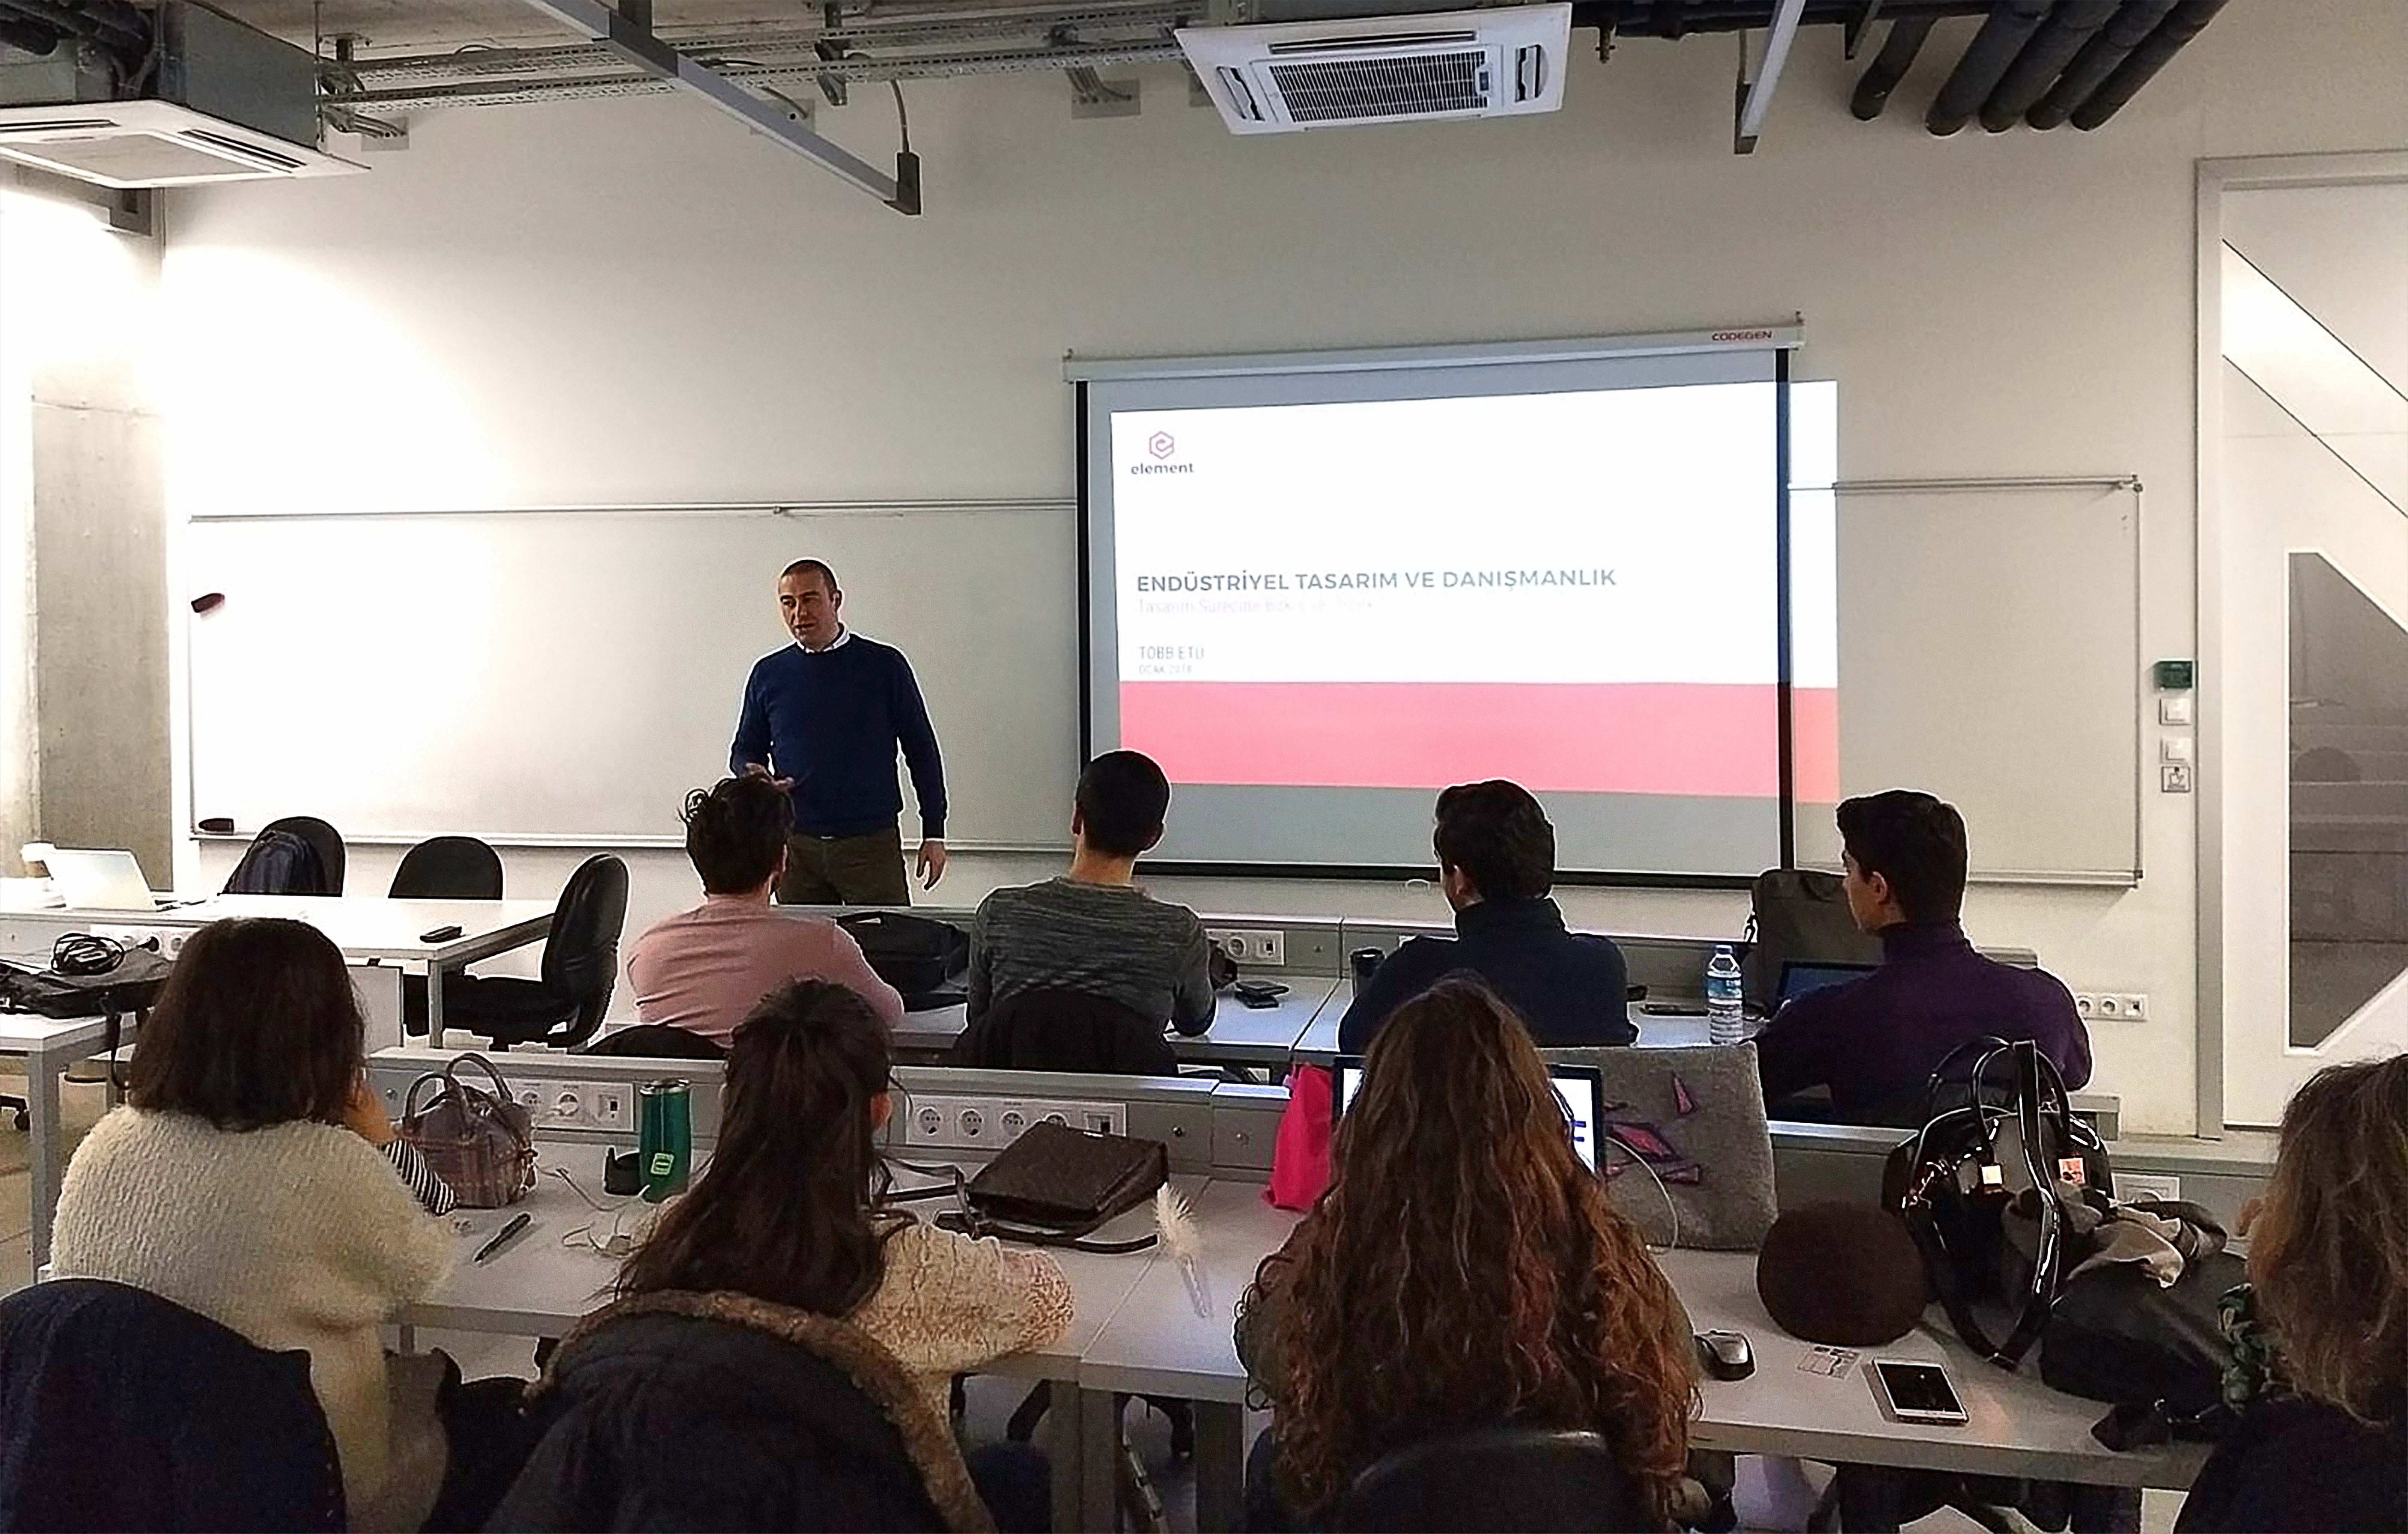 Element Product Design Founder Selim Gençoğlu Shared His Experiences with the Students of the Department of Industrial Design